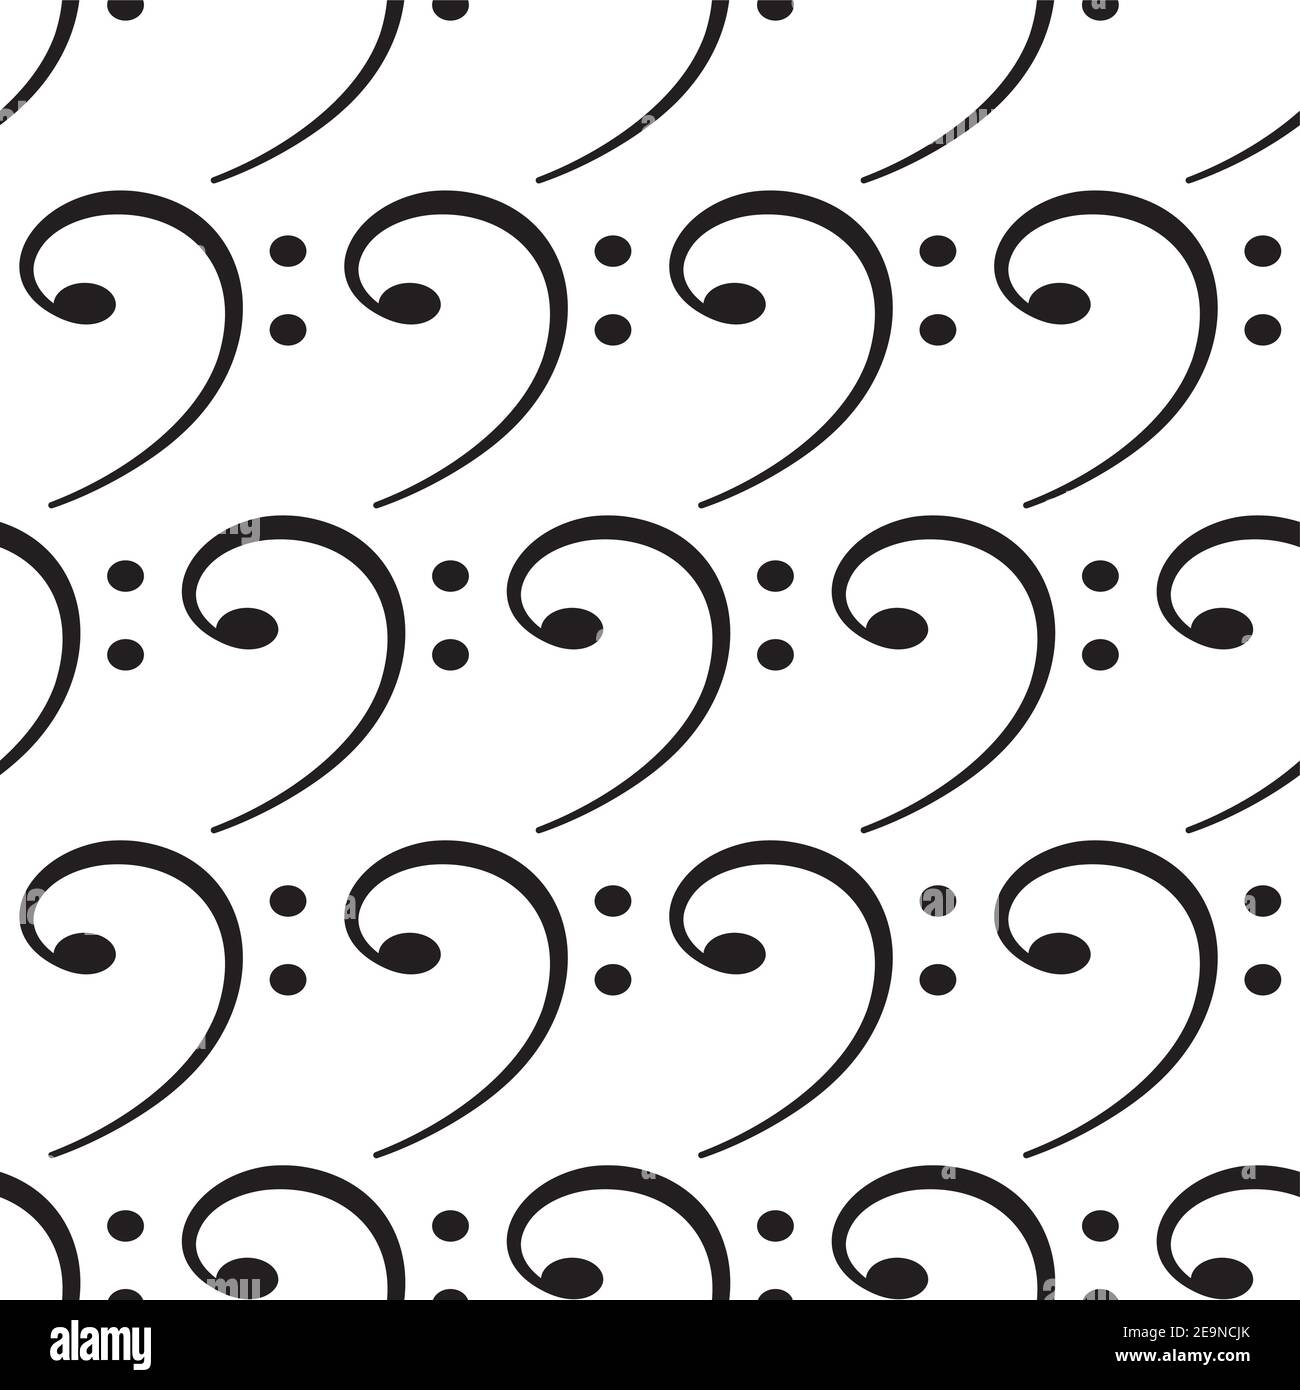 Seamless pattern of the bass clef symbols Stock Vector